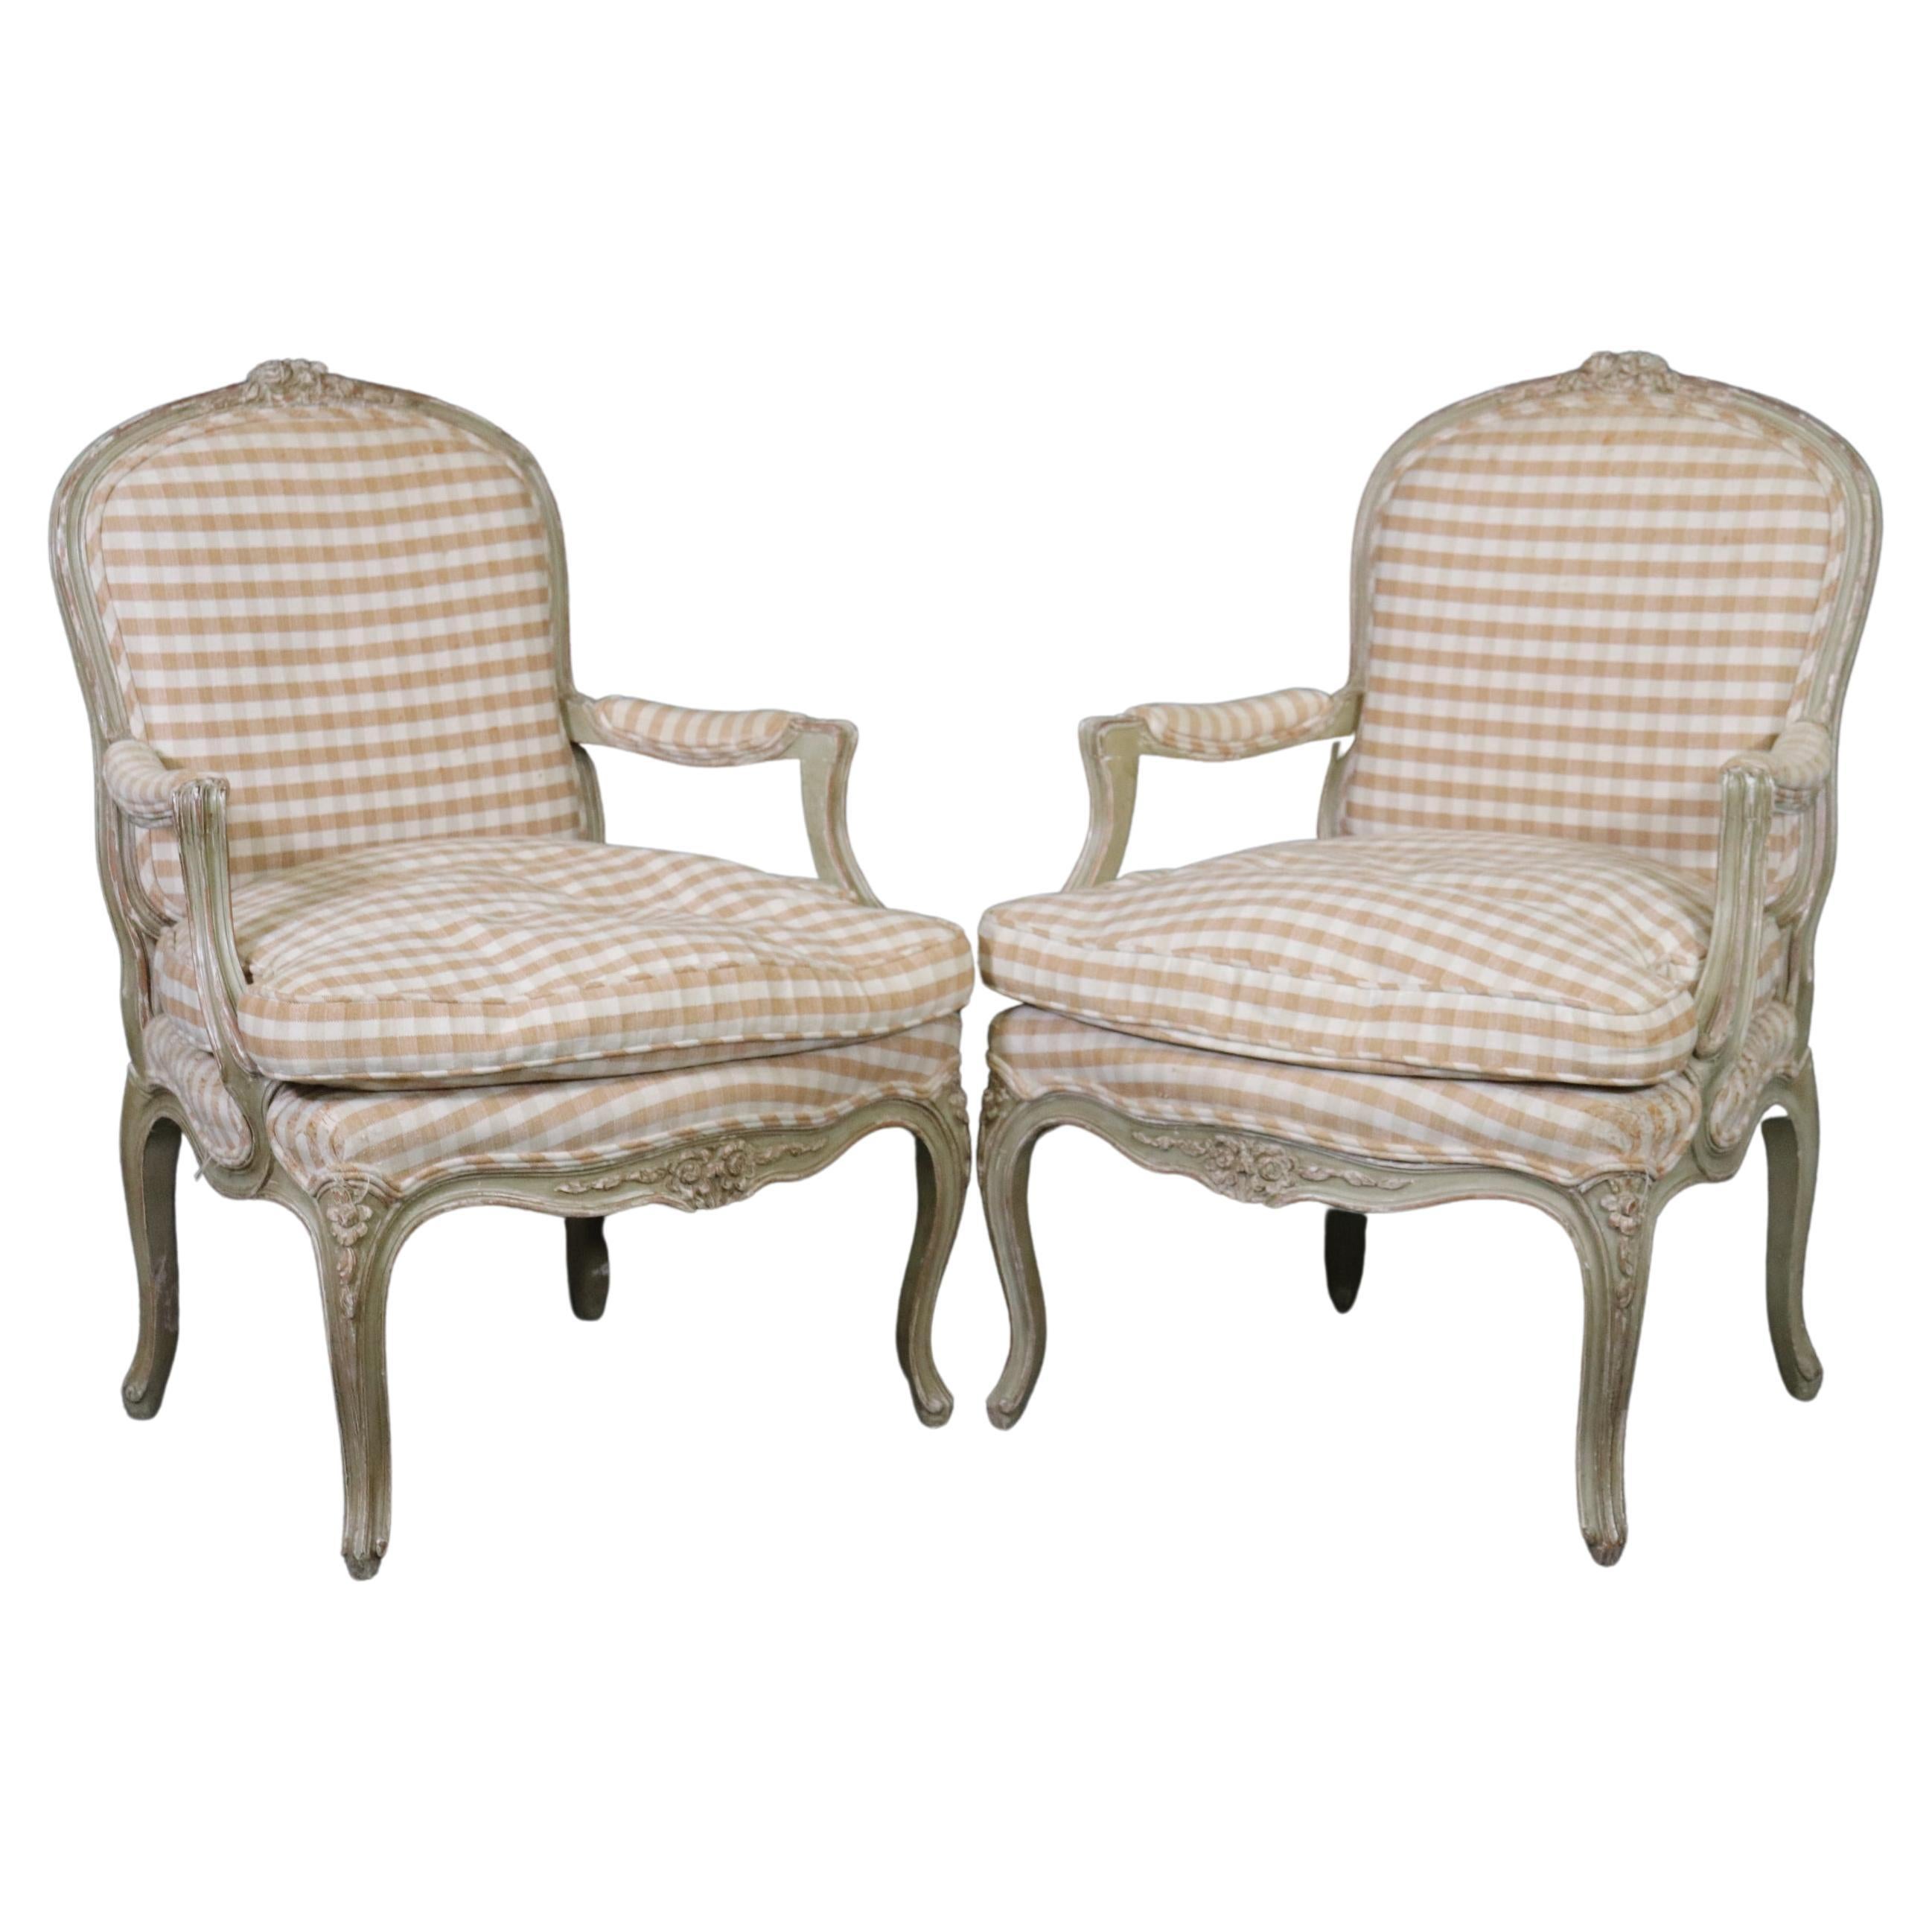 Pair of Distressed Painted French Carved Louis XV Armchairs, Circa 1930s